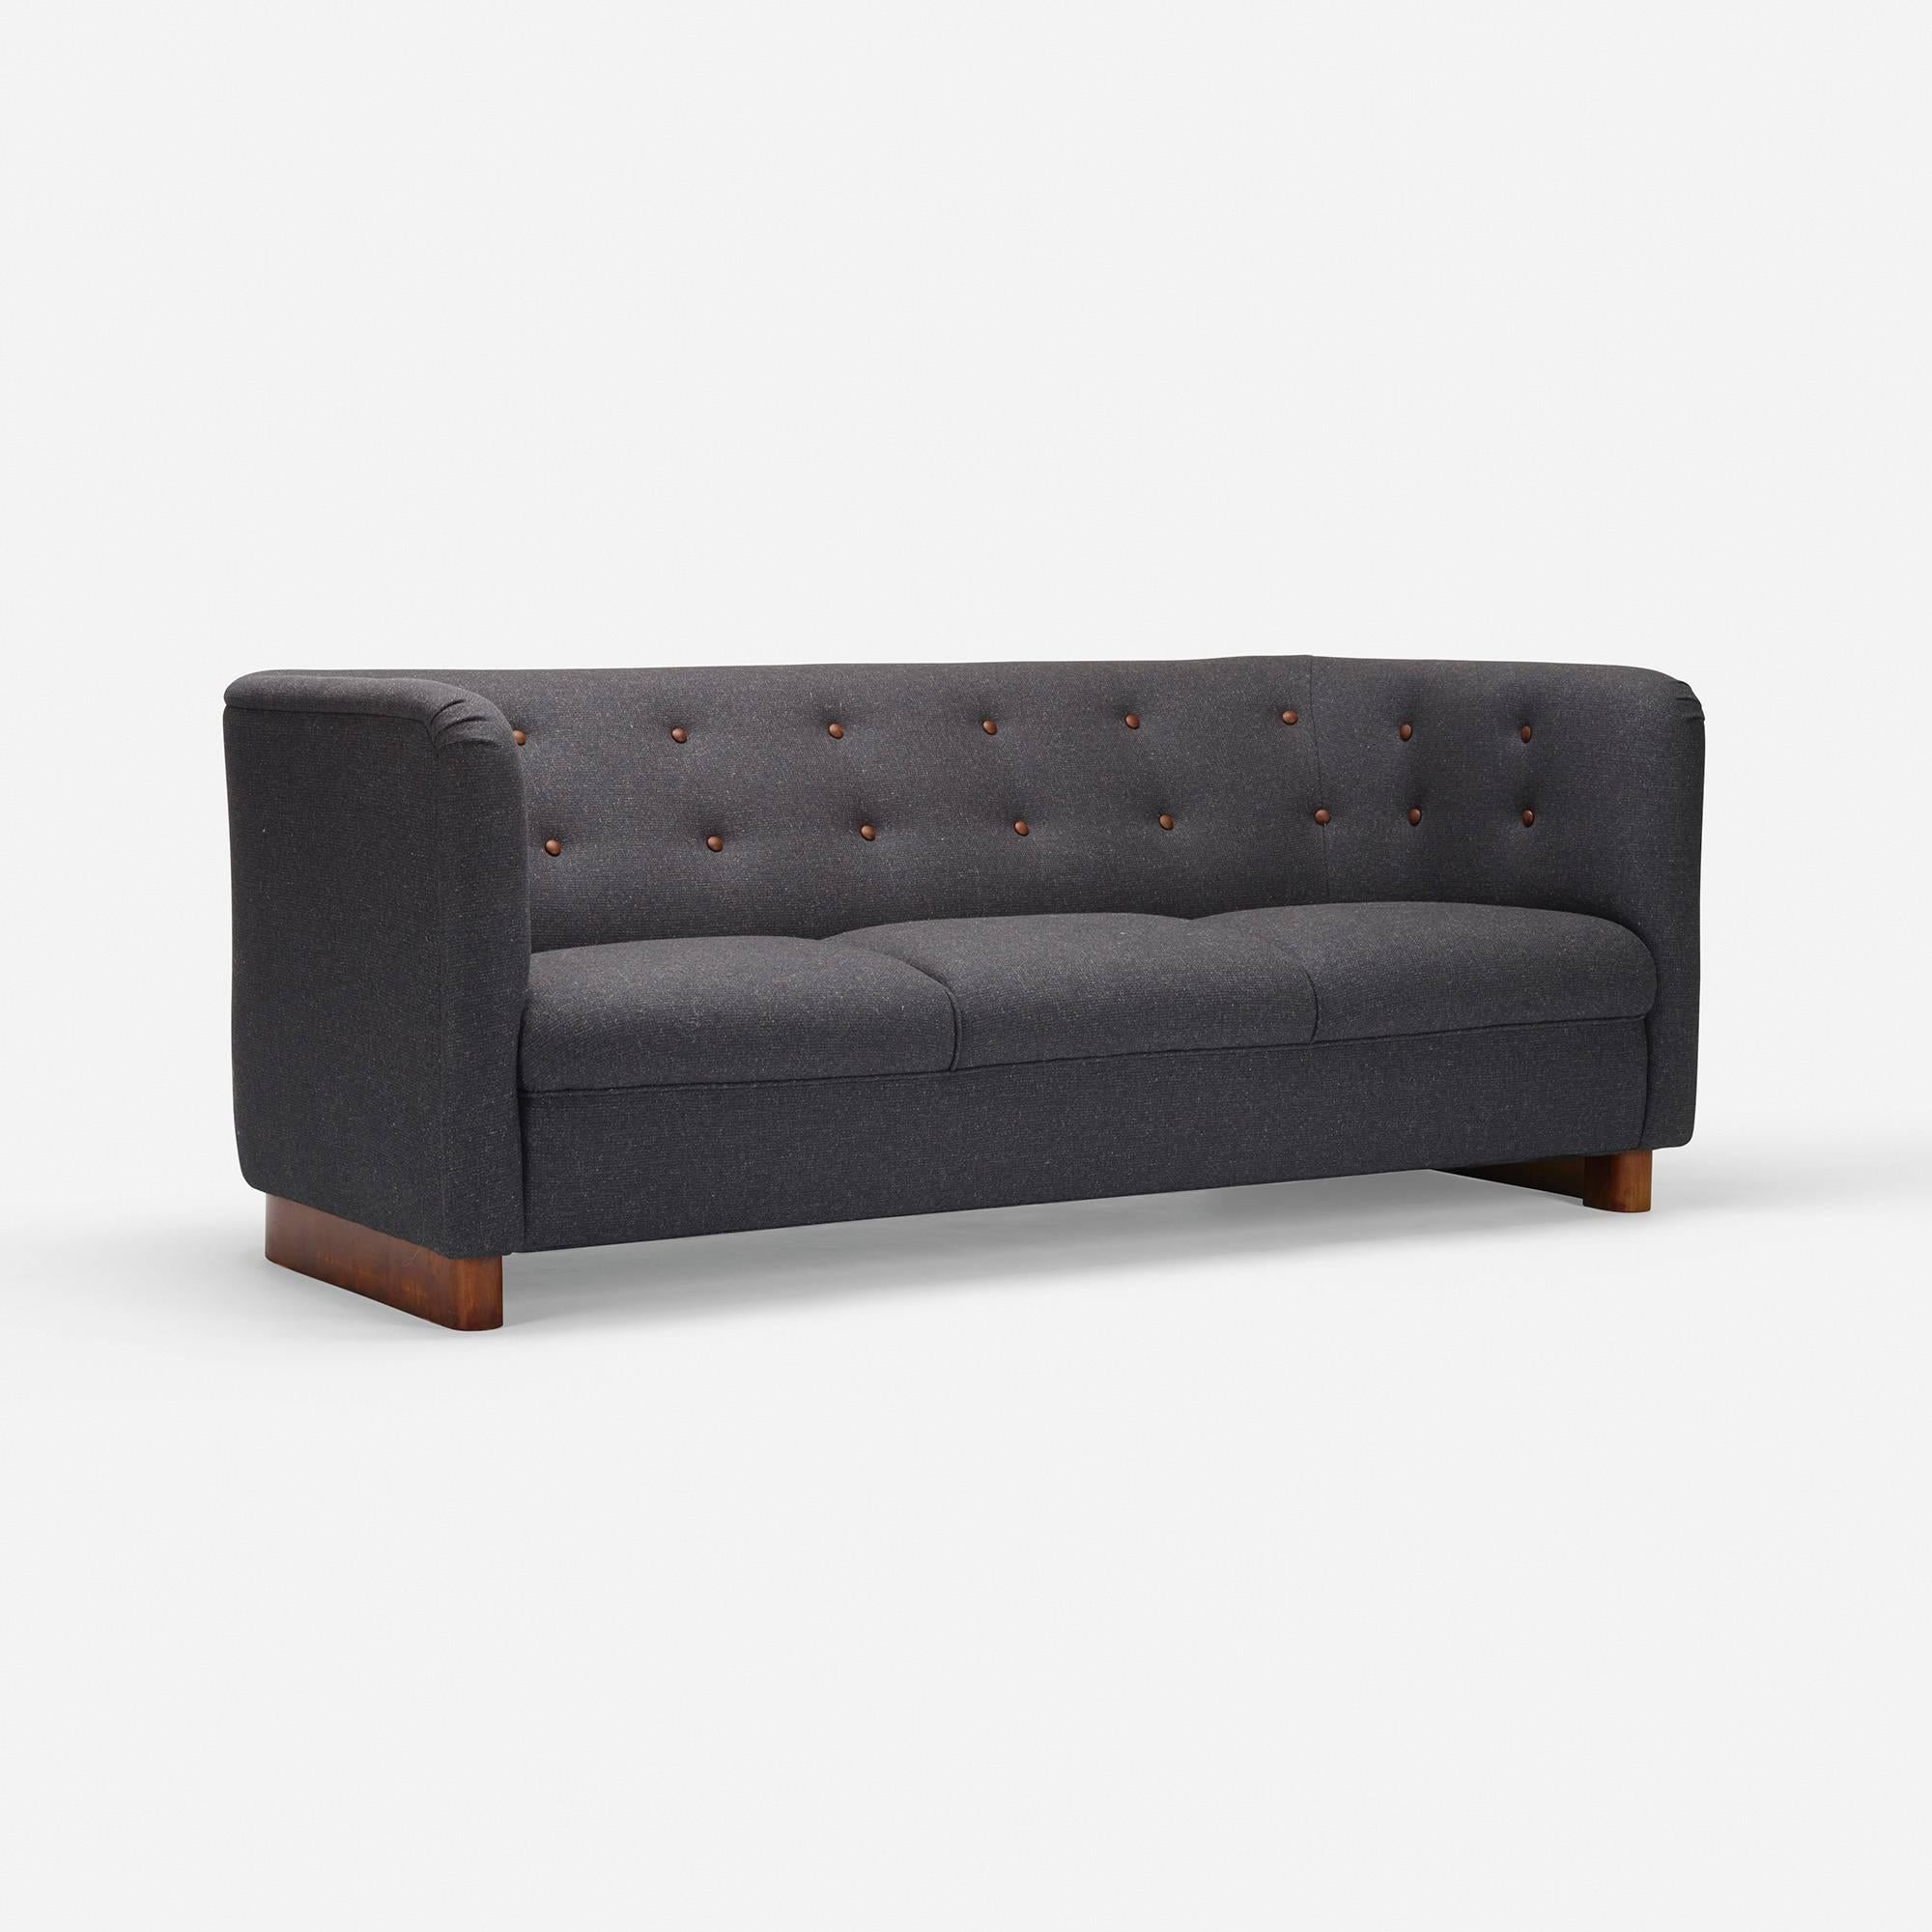 This elegant tuxedo style sofa has been recently updated in a fine menswear inspired wool with a light checked texture and faint melange. The piece is set off with dark brown leather buttons which tie back to the color of sofa's stylish curved base.